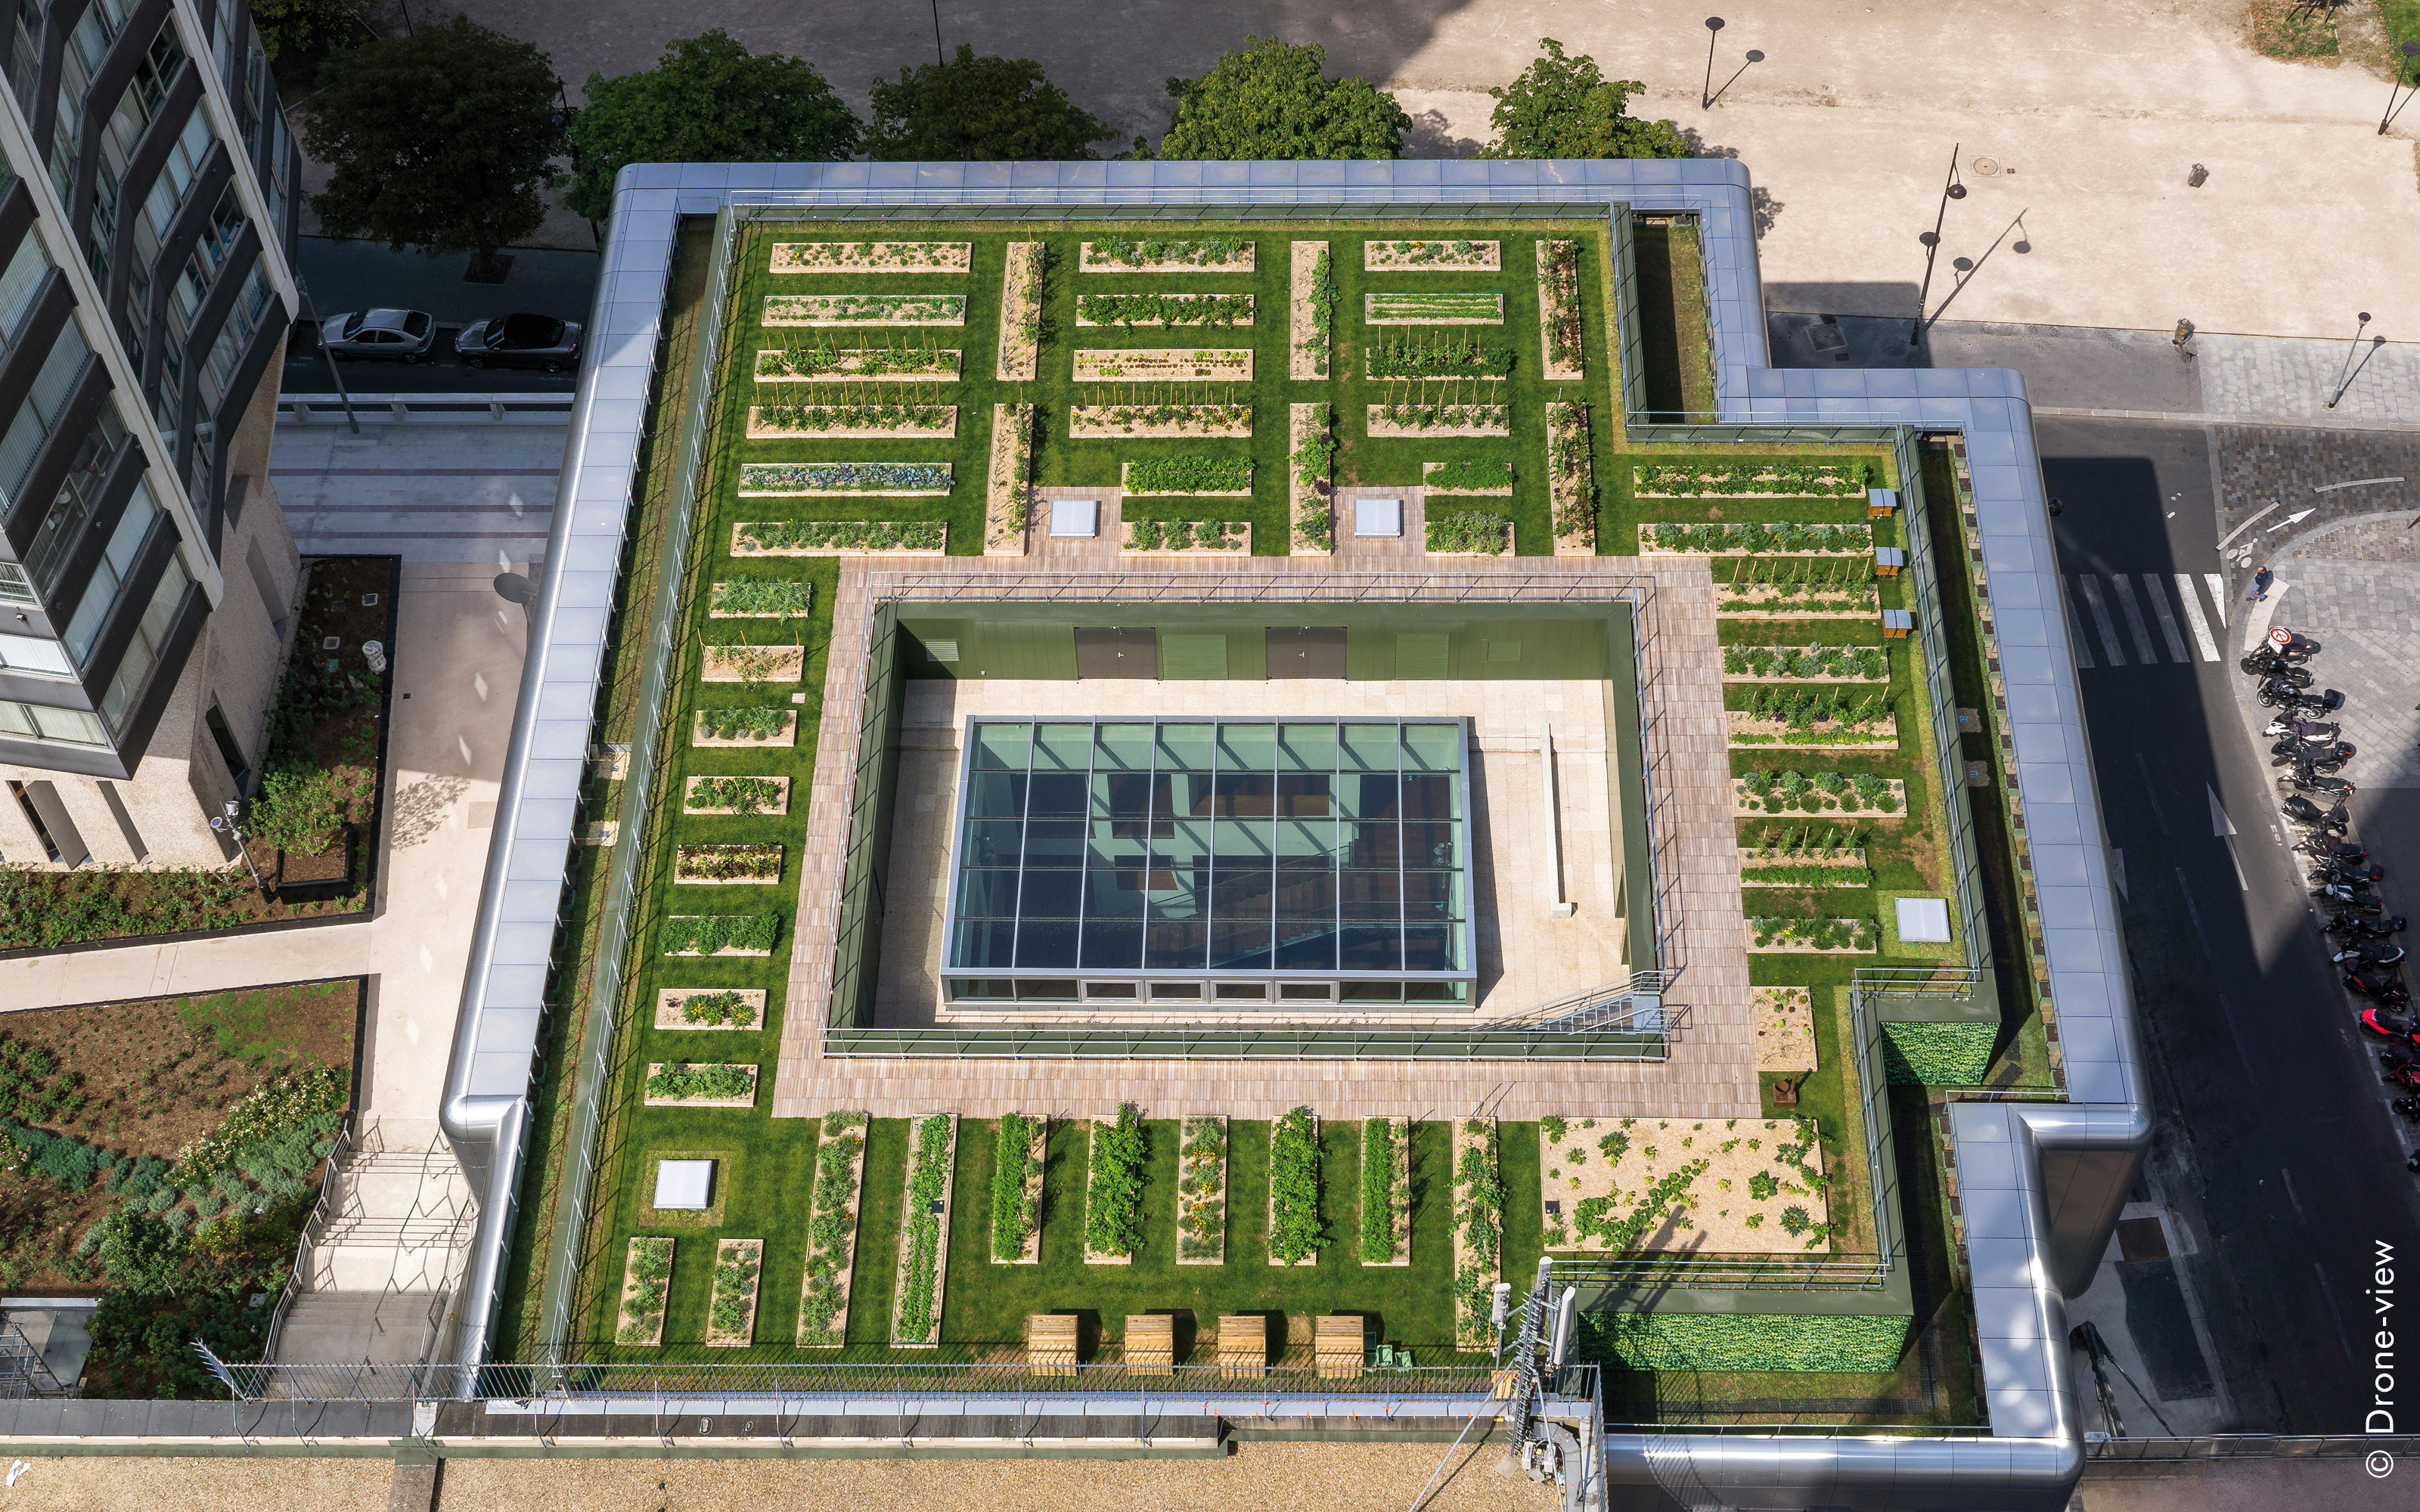 Bird's eye view of a green roof with vegetable plant beds